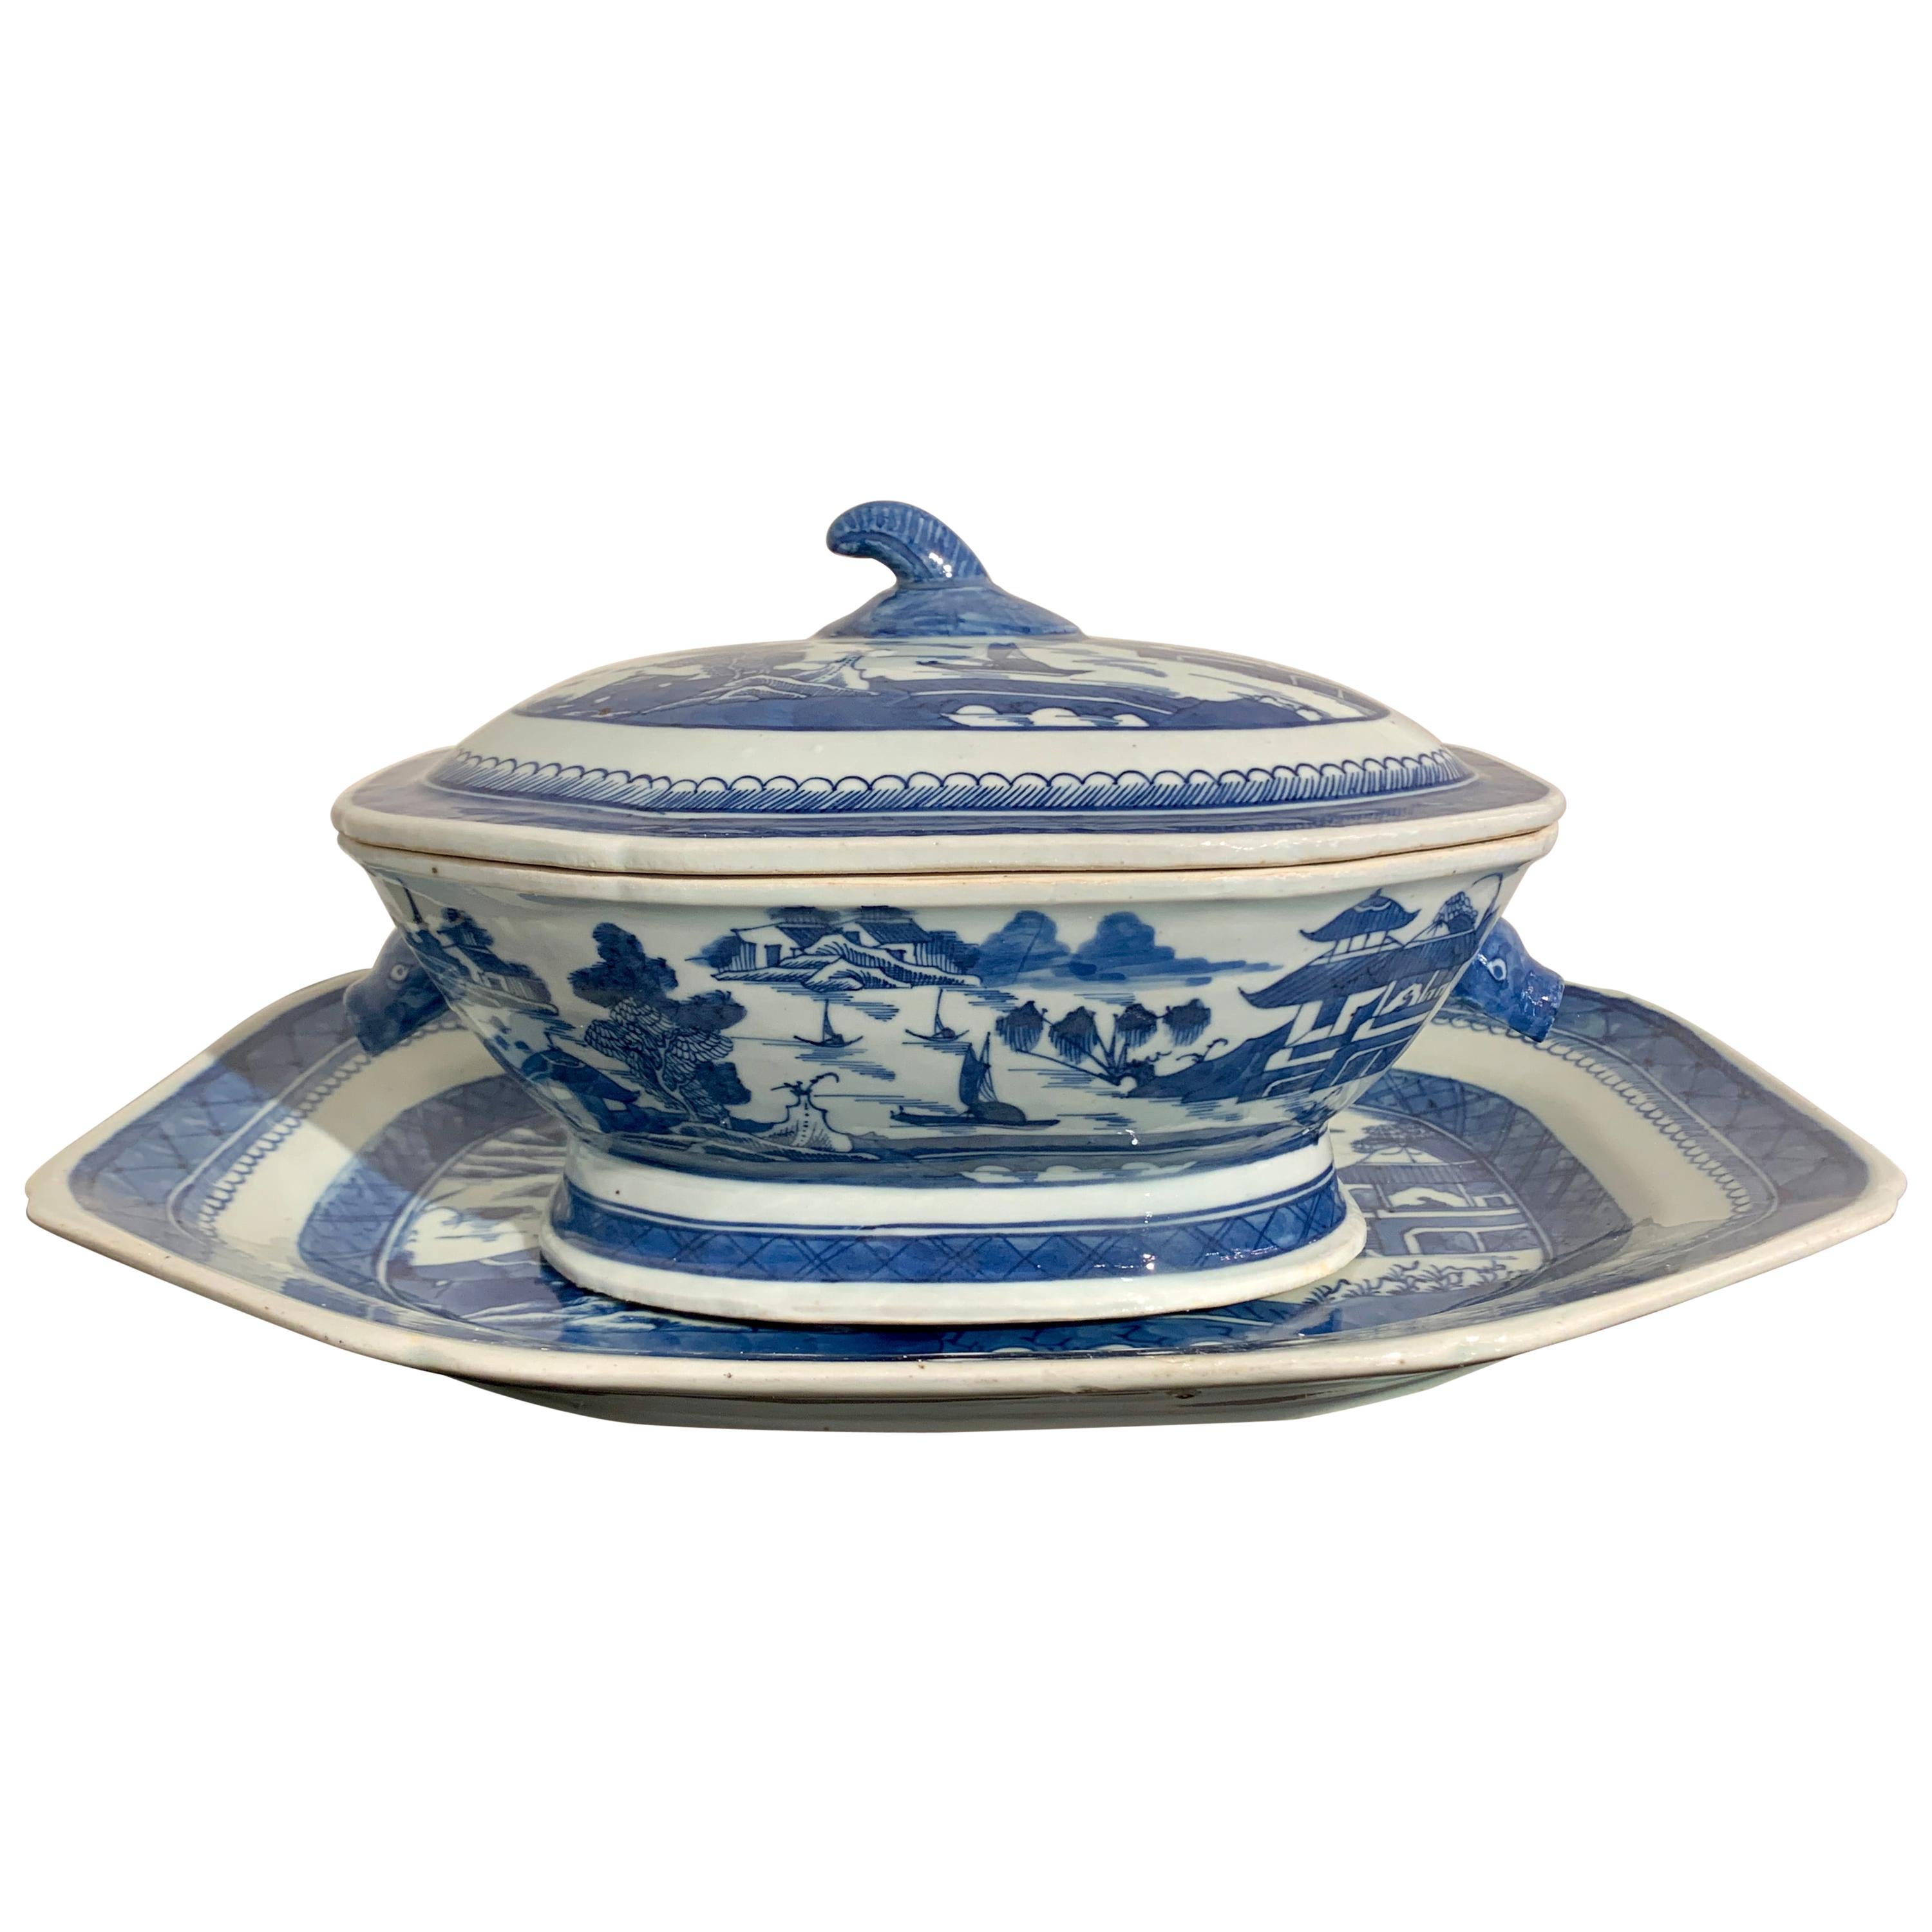 Chinese Export Blue and White Porcelain Covered Tureen and Platter, 19th Cenutry